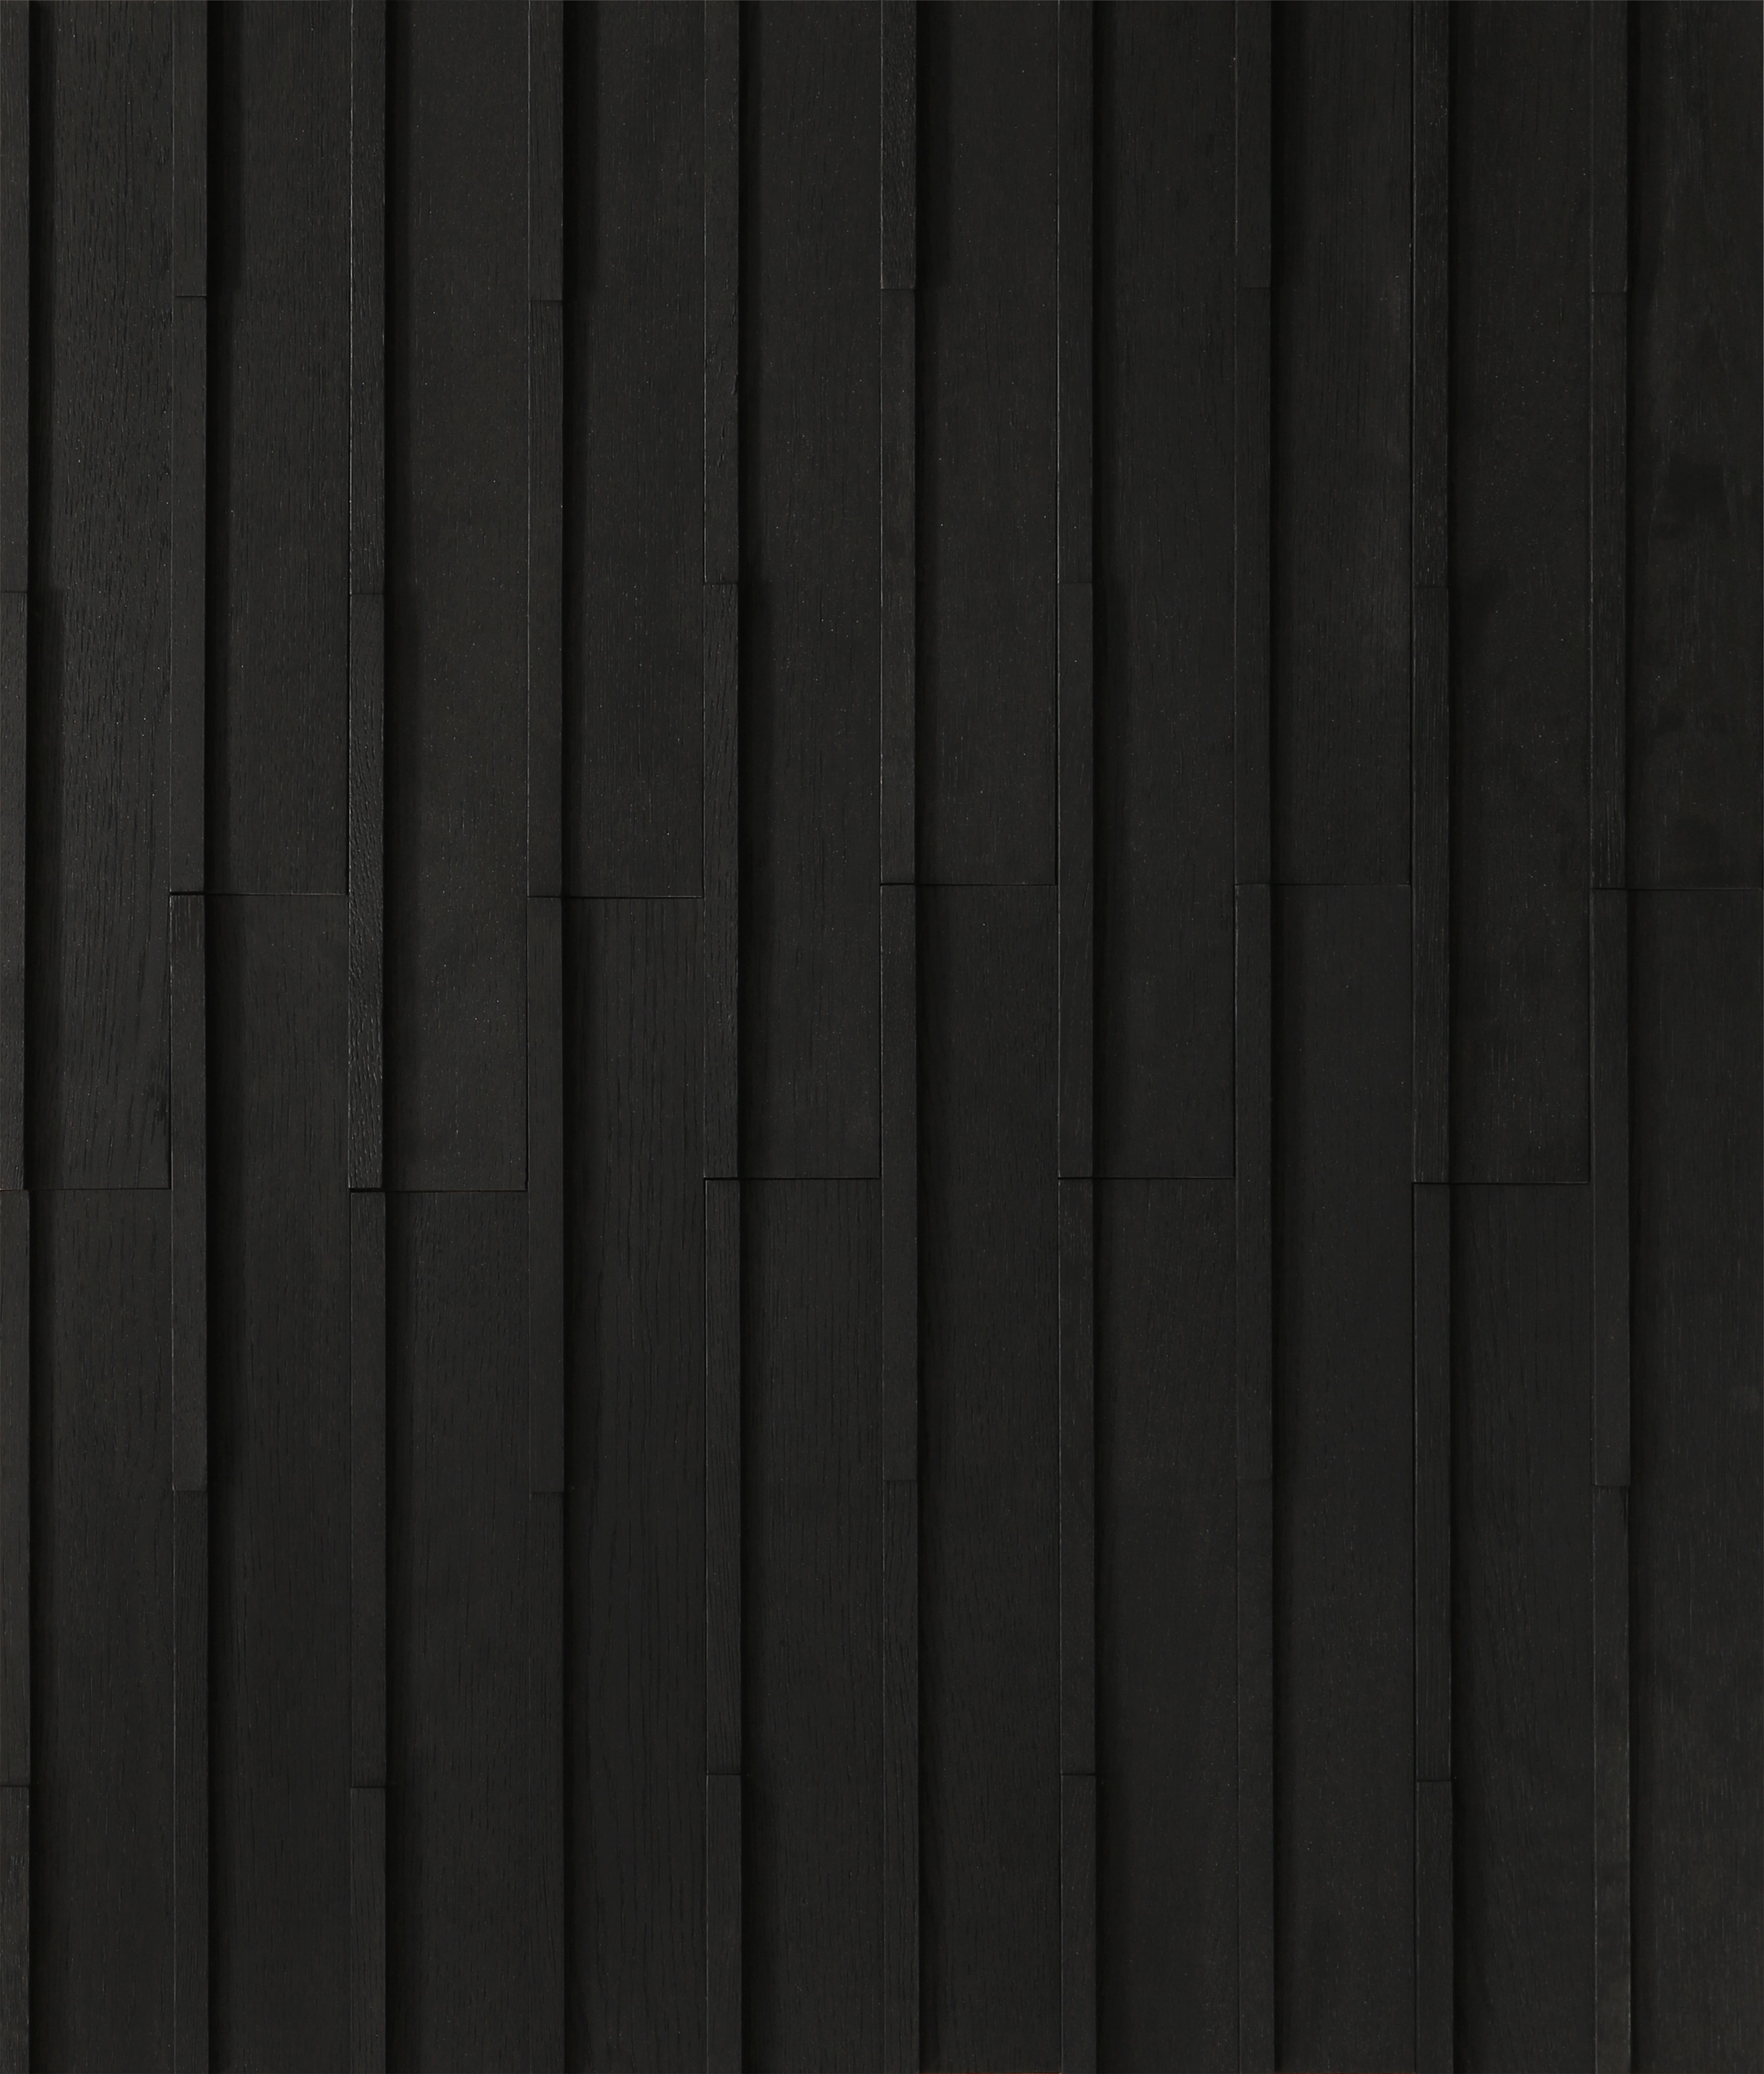 duchateau inceptiv kubik noir oak three dimensional wall natural wood panel lacquer for interior use distributed by surface group international